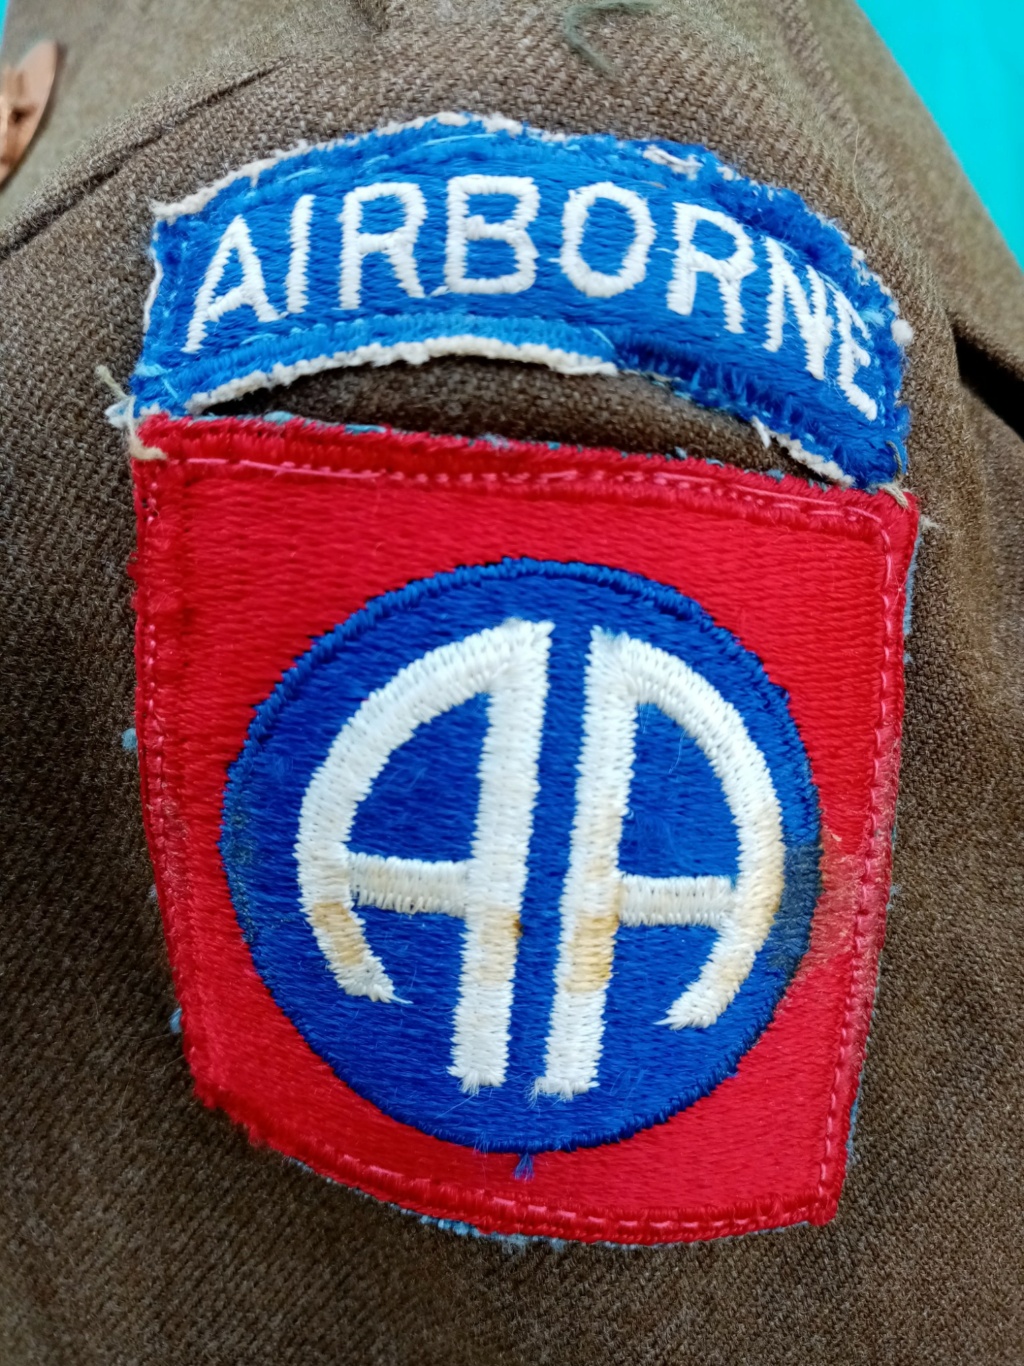 82nd Airborne SSI patch 16590210